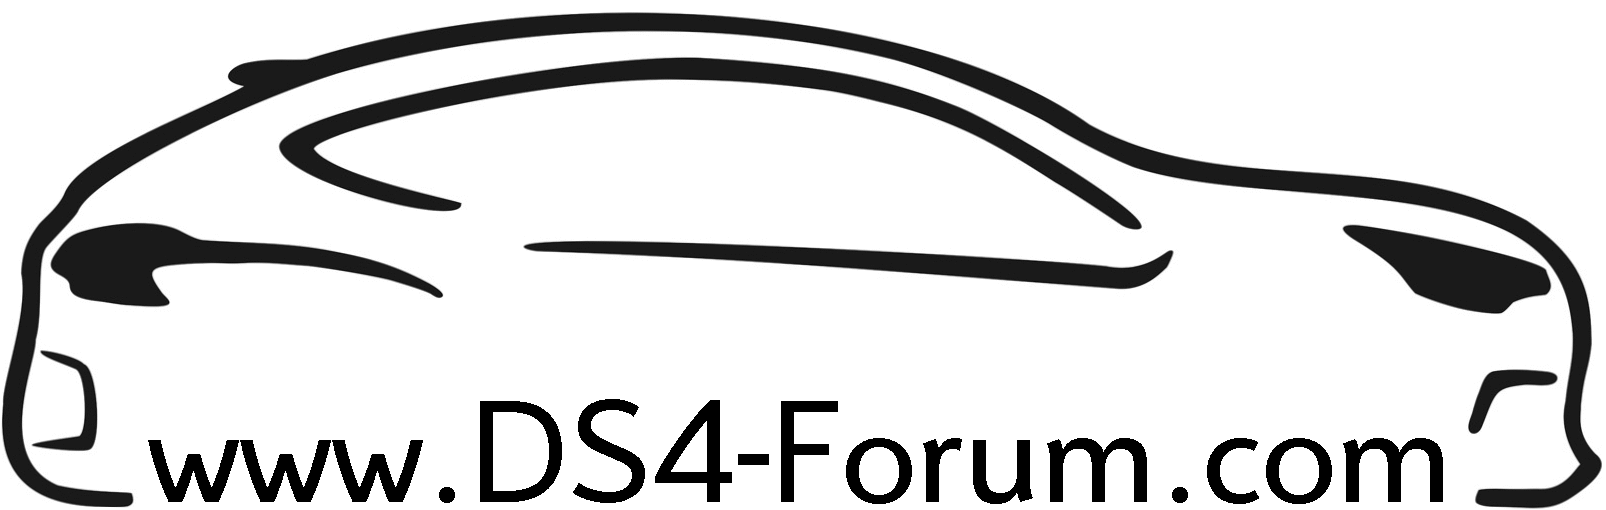 ds4-forum-logo3.png